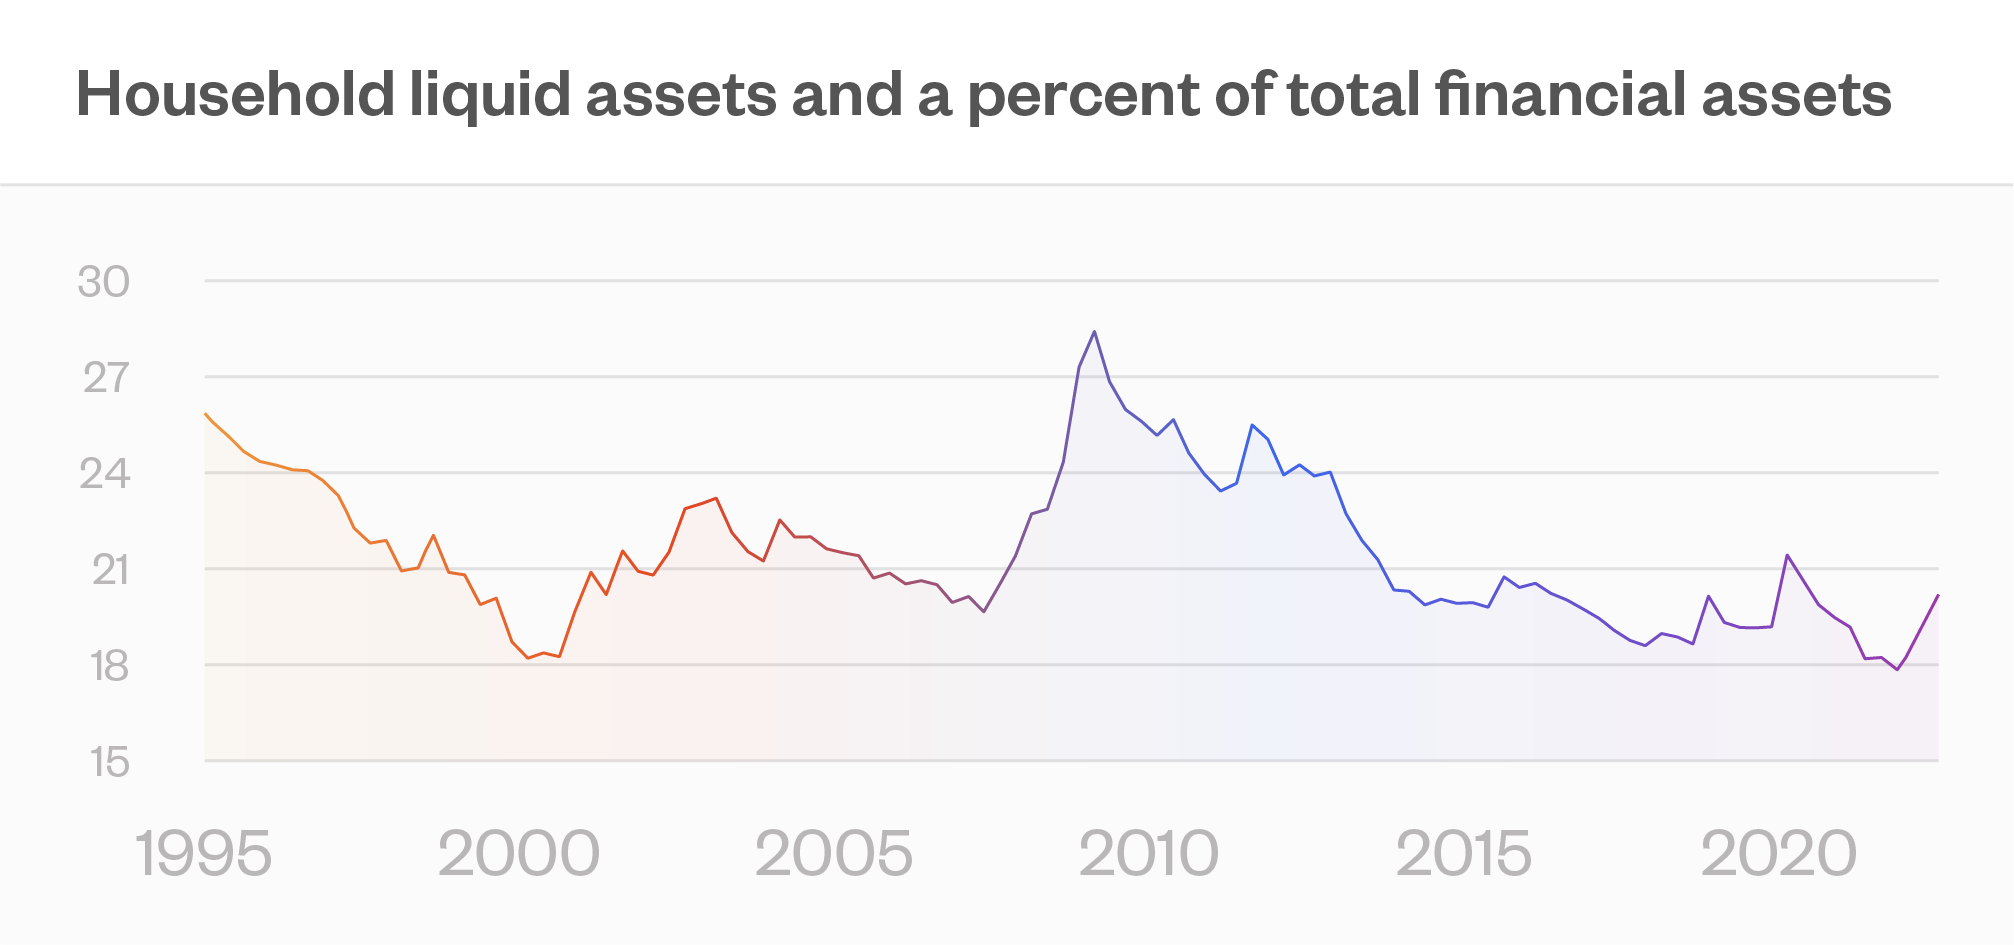 Household liquid assets and a percent of total financial assets